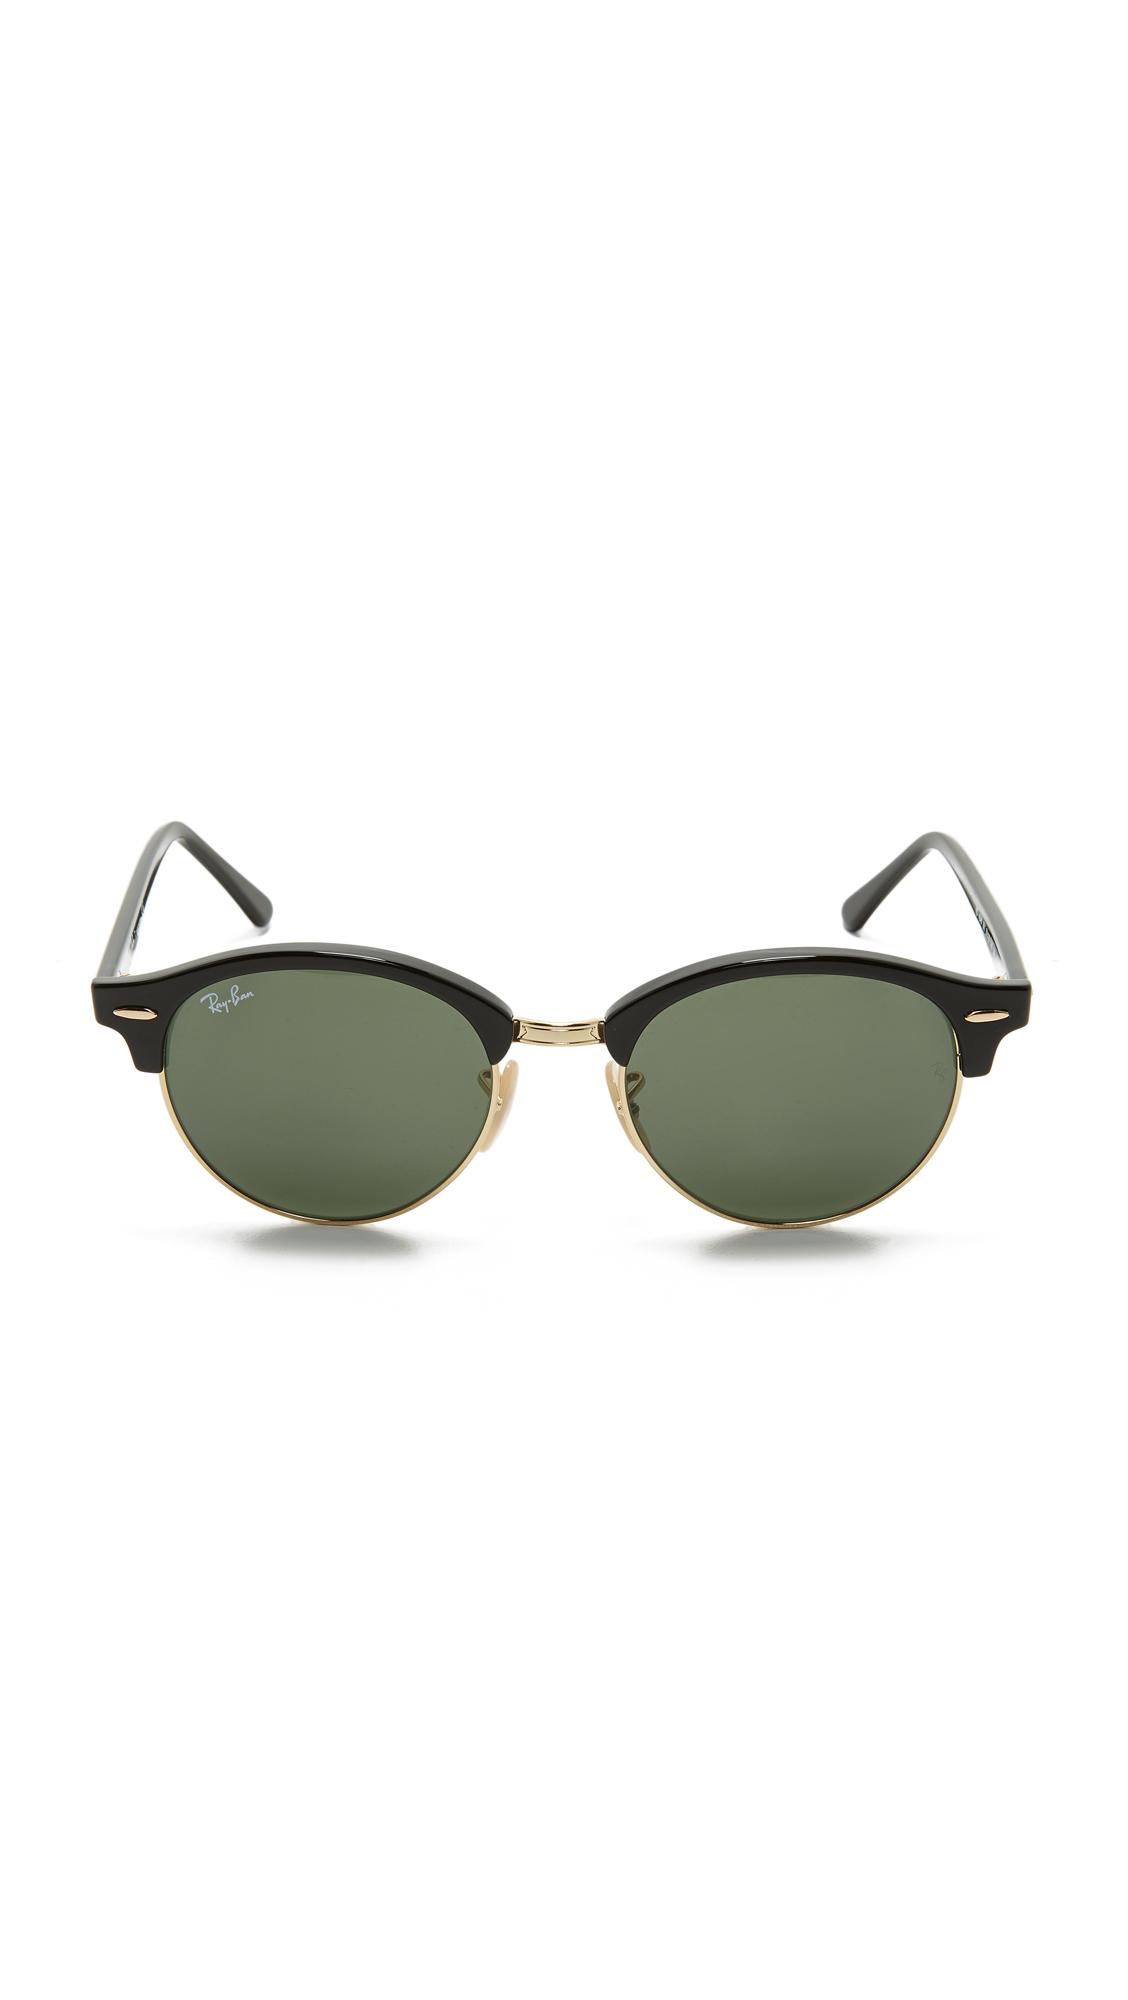 Ray-Ban Rb4246 Clubmaster Round Sunglasses in Black/Green (Green) - Lyst